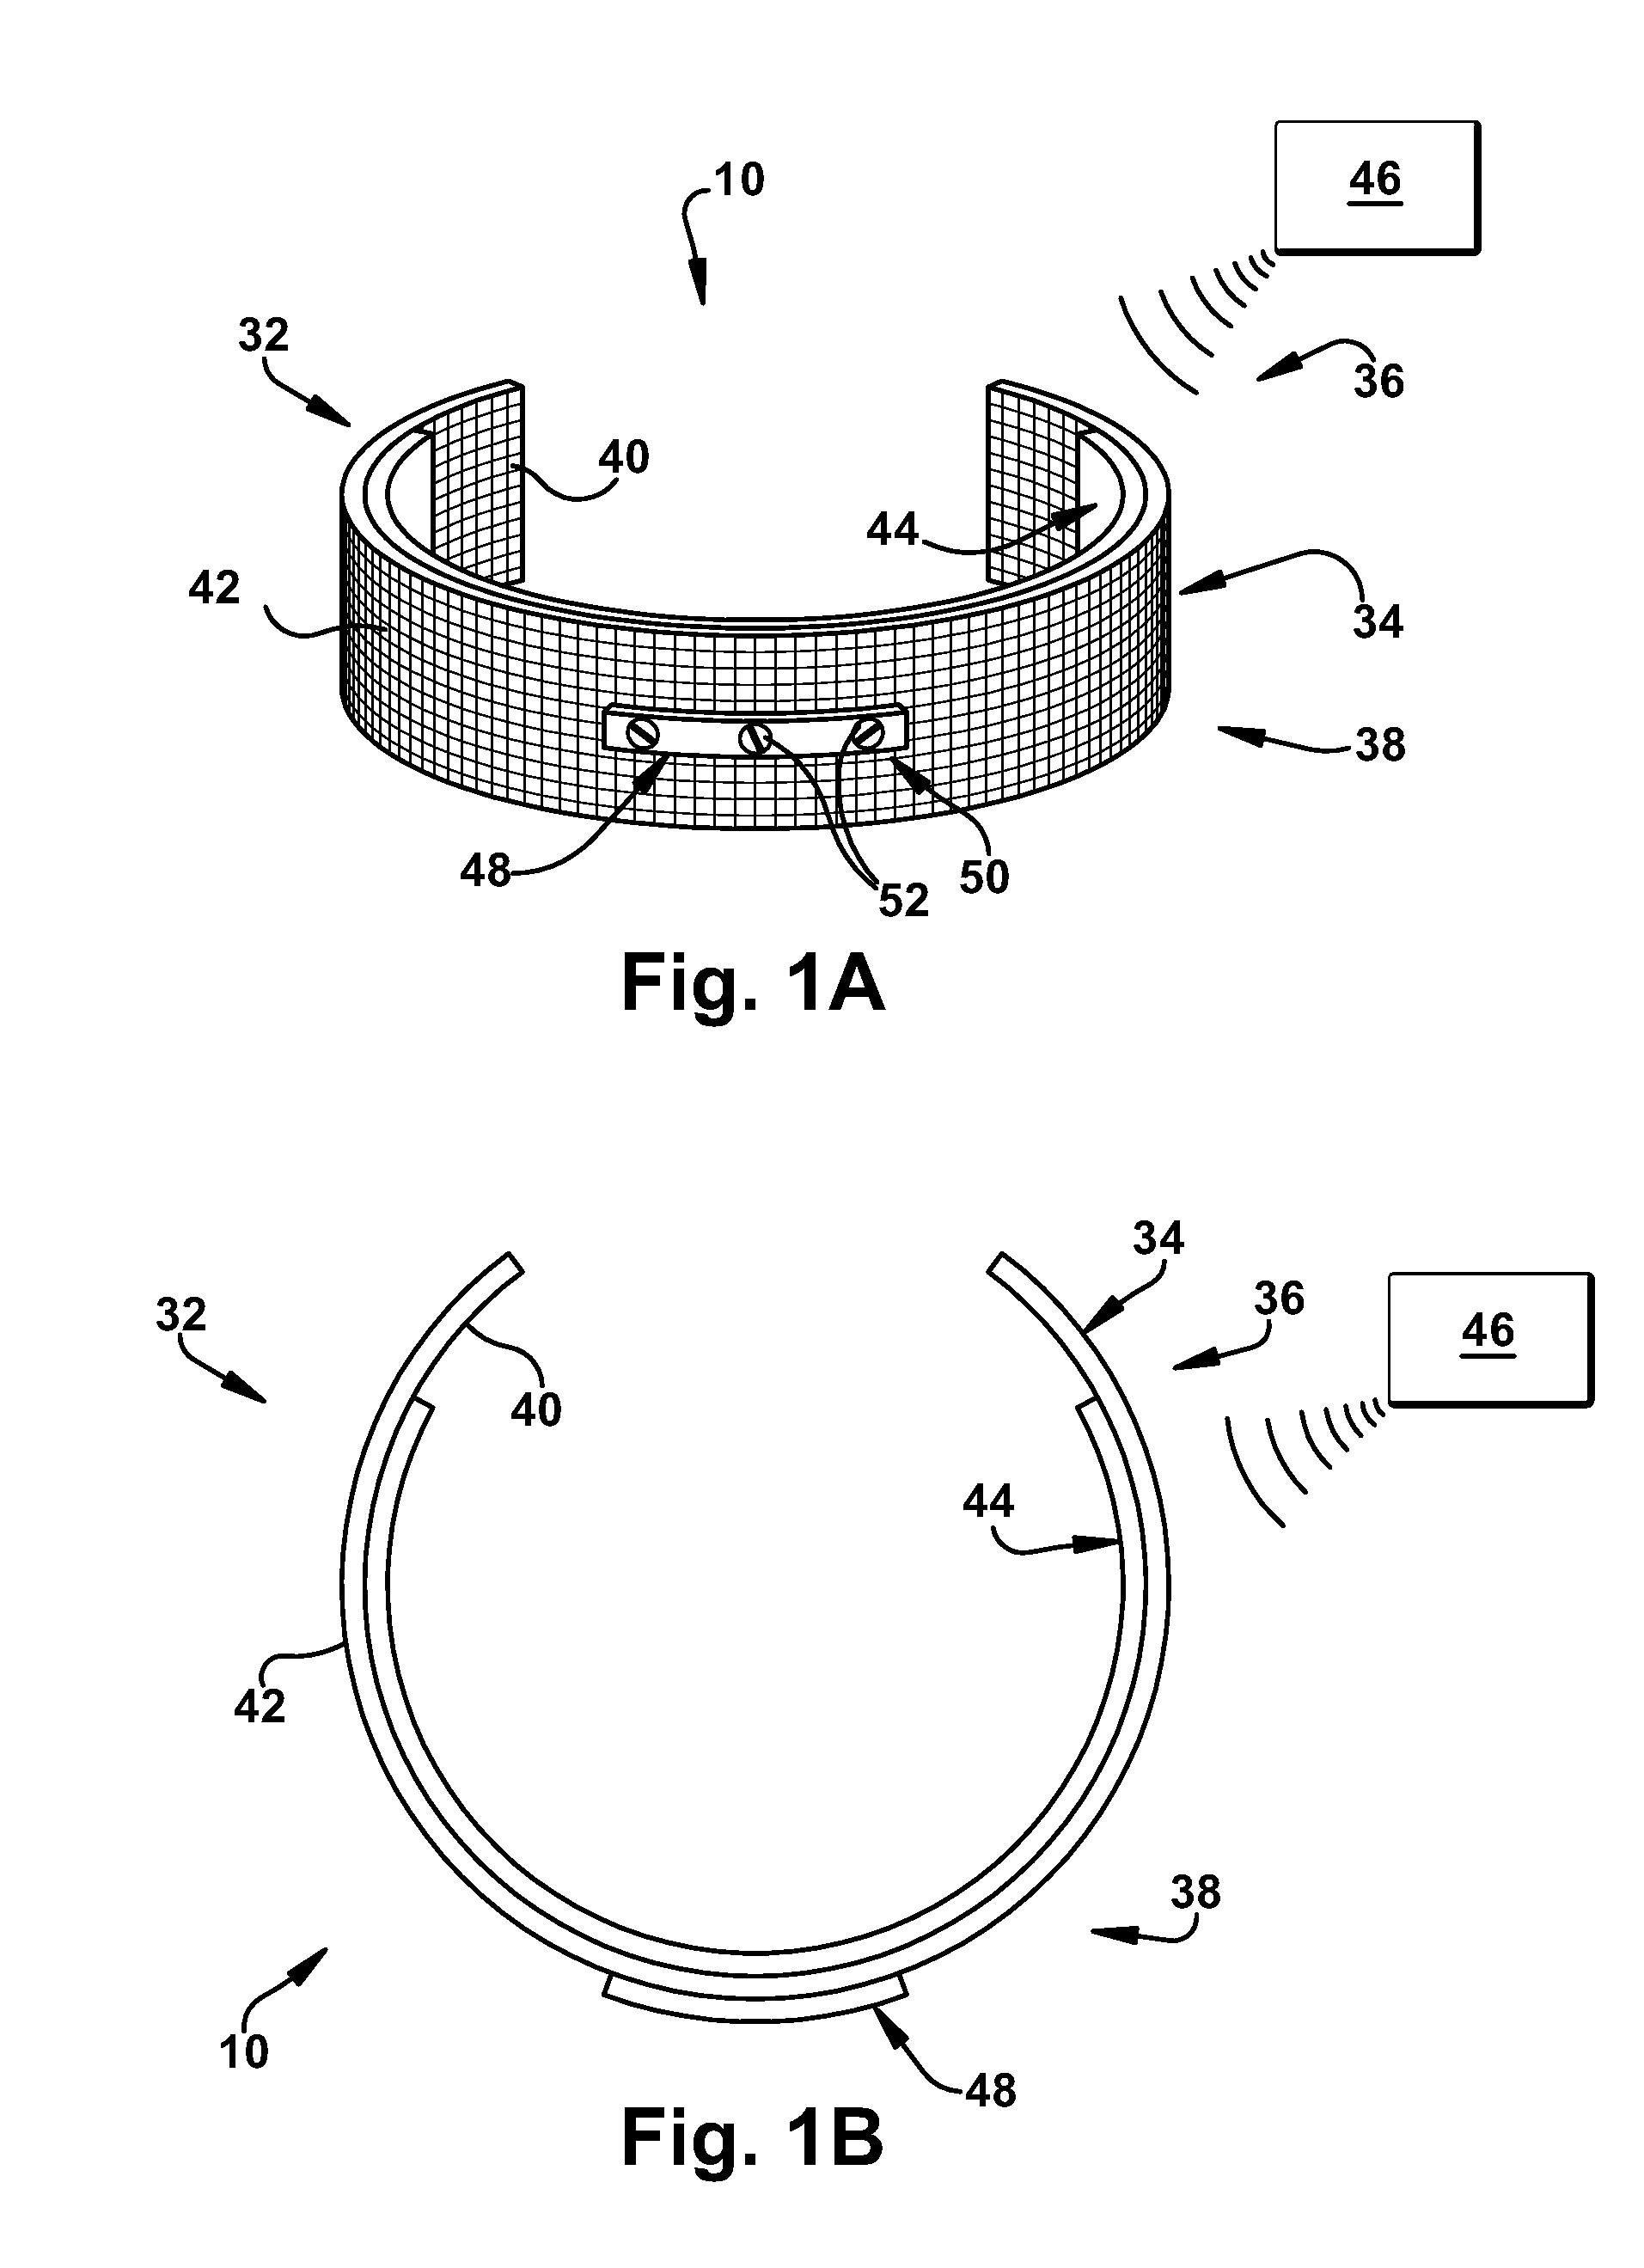 Apparatus and methods for treating pulmonary conditions